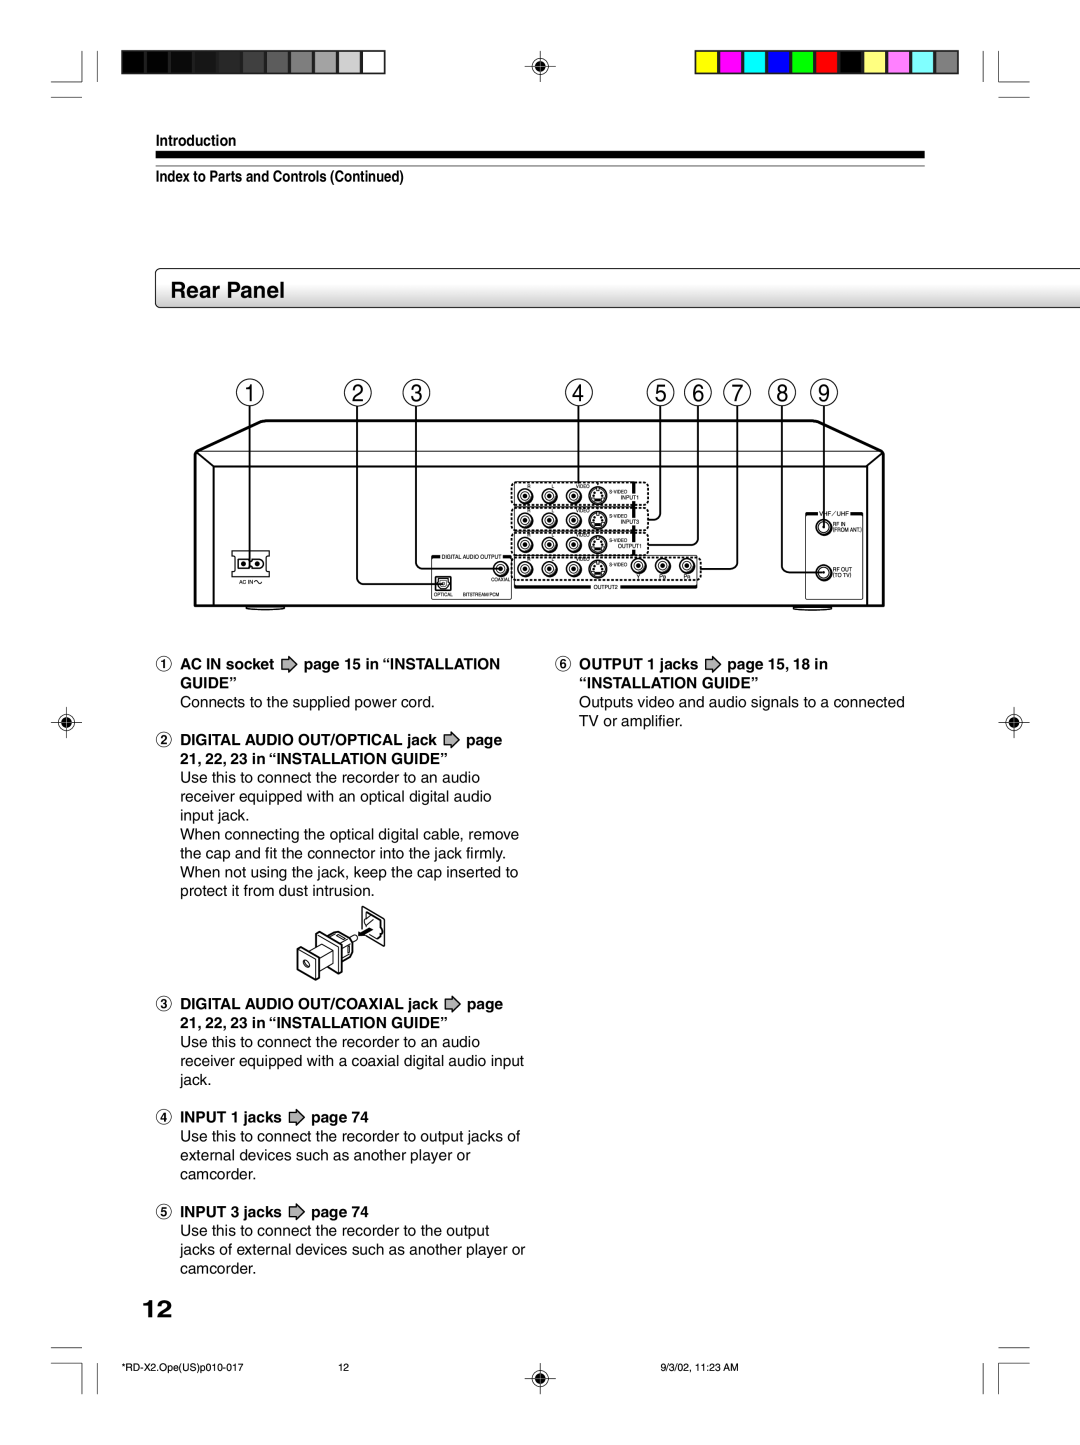 Toshiba RD-X2U Rear Panel, Index to Parts and Controls Continued, AC IN socket, page 15 in “INSTALLATION, OUTPUT 1 jacks 